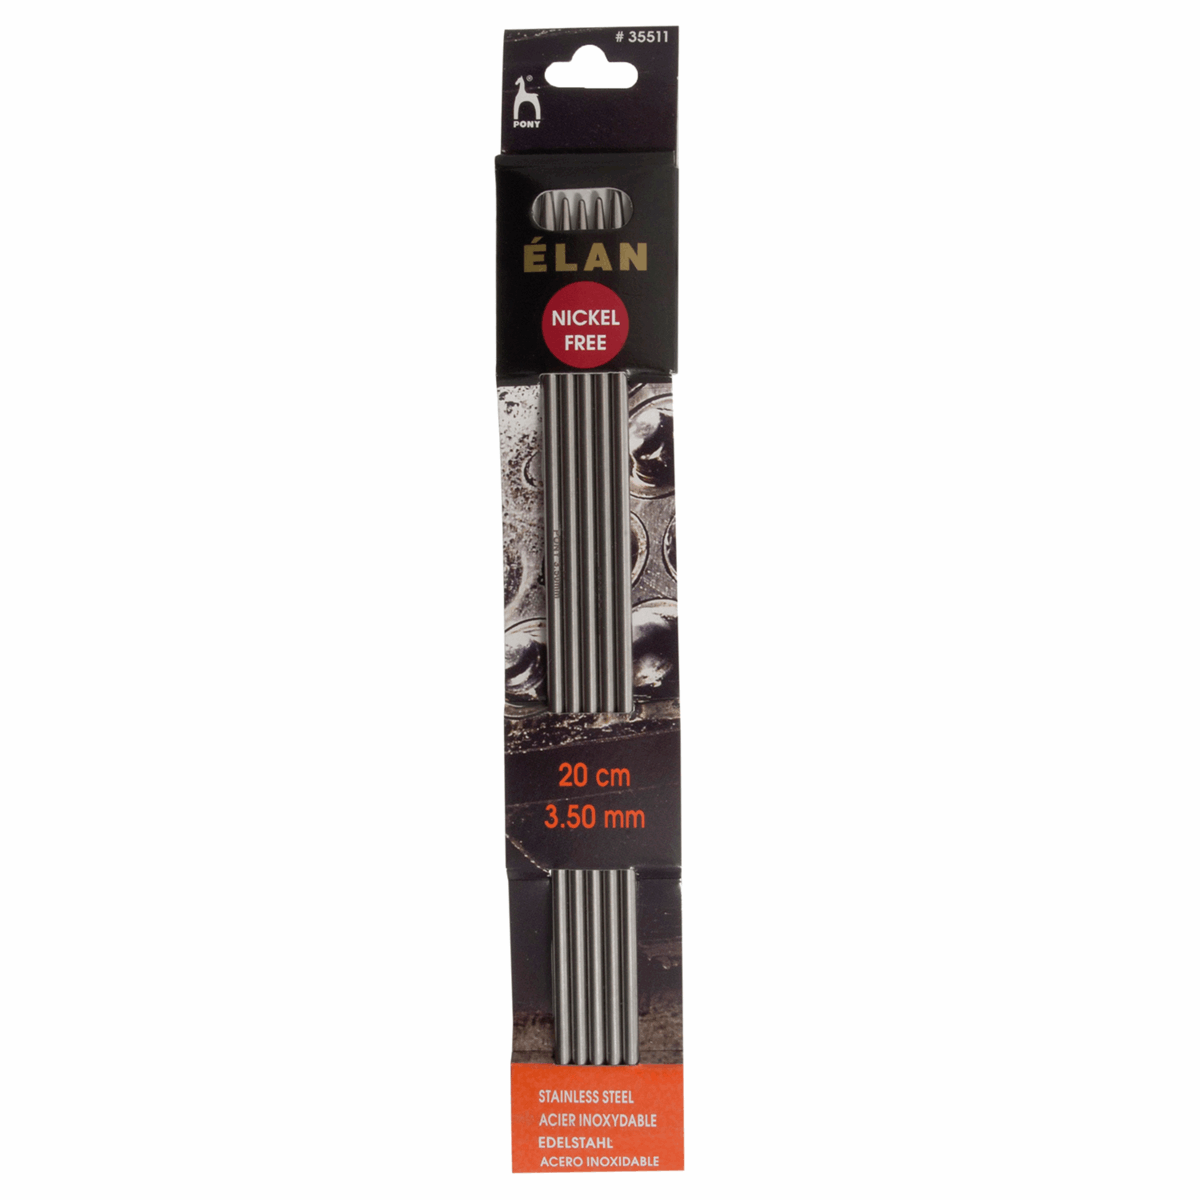 PONY 'Elan' Double-Ended Stainless Steel Knitting Pins - 20cm x 3.50mm (Set of 5)